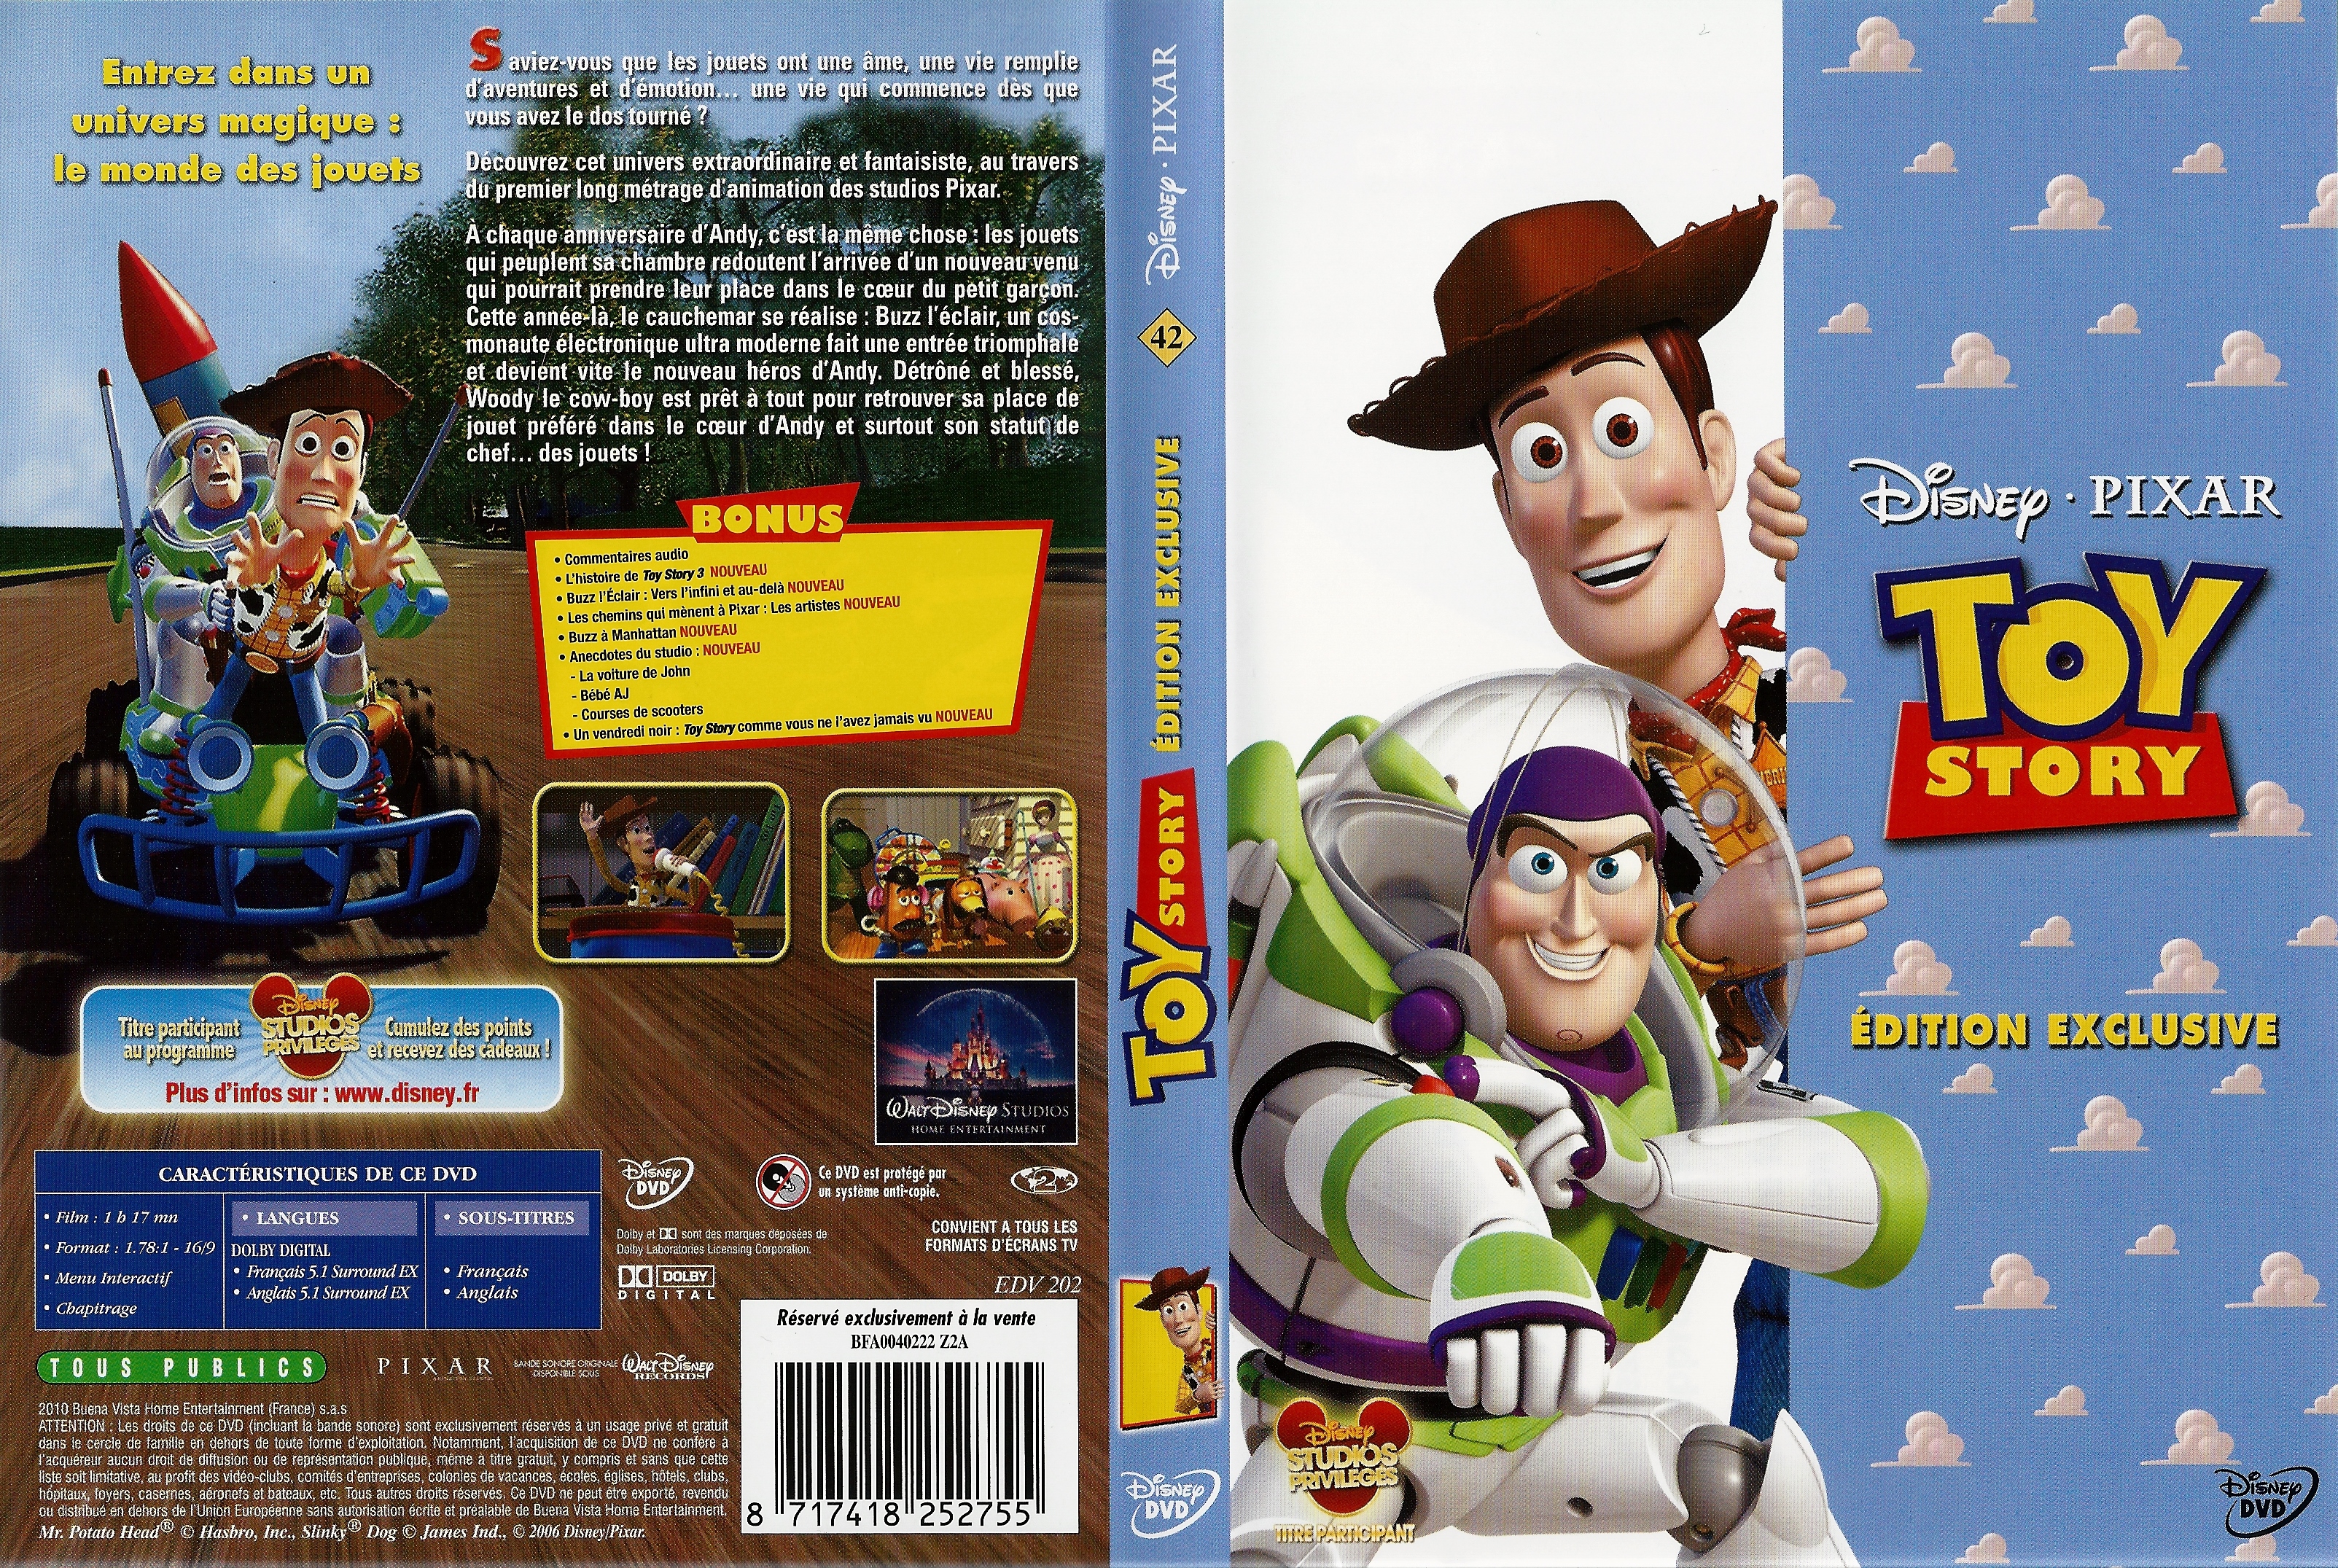 Jaquette DVD Toy story v3